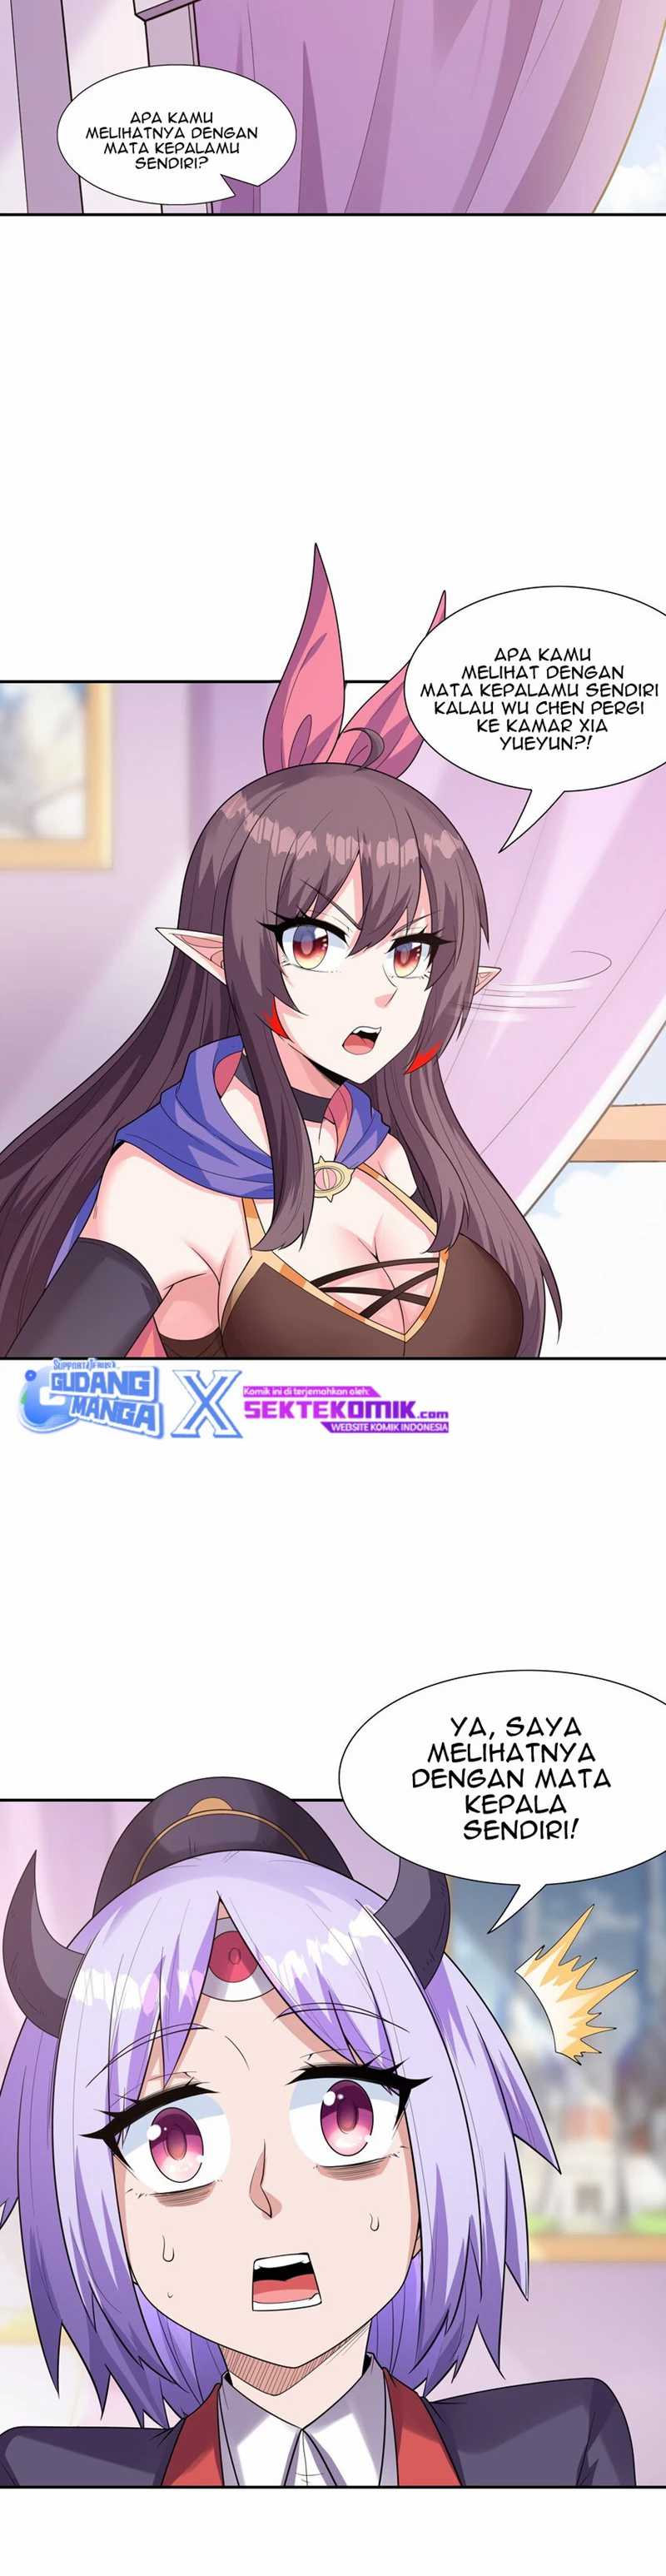 My Harem Is Entirely Female Demon Villains Chapter 41